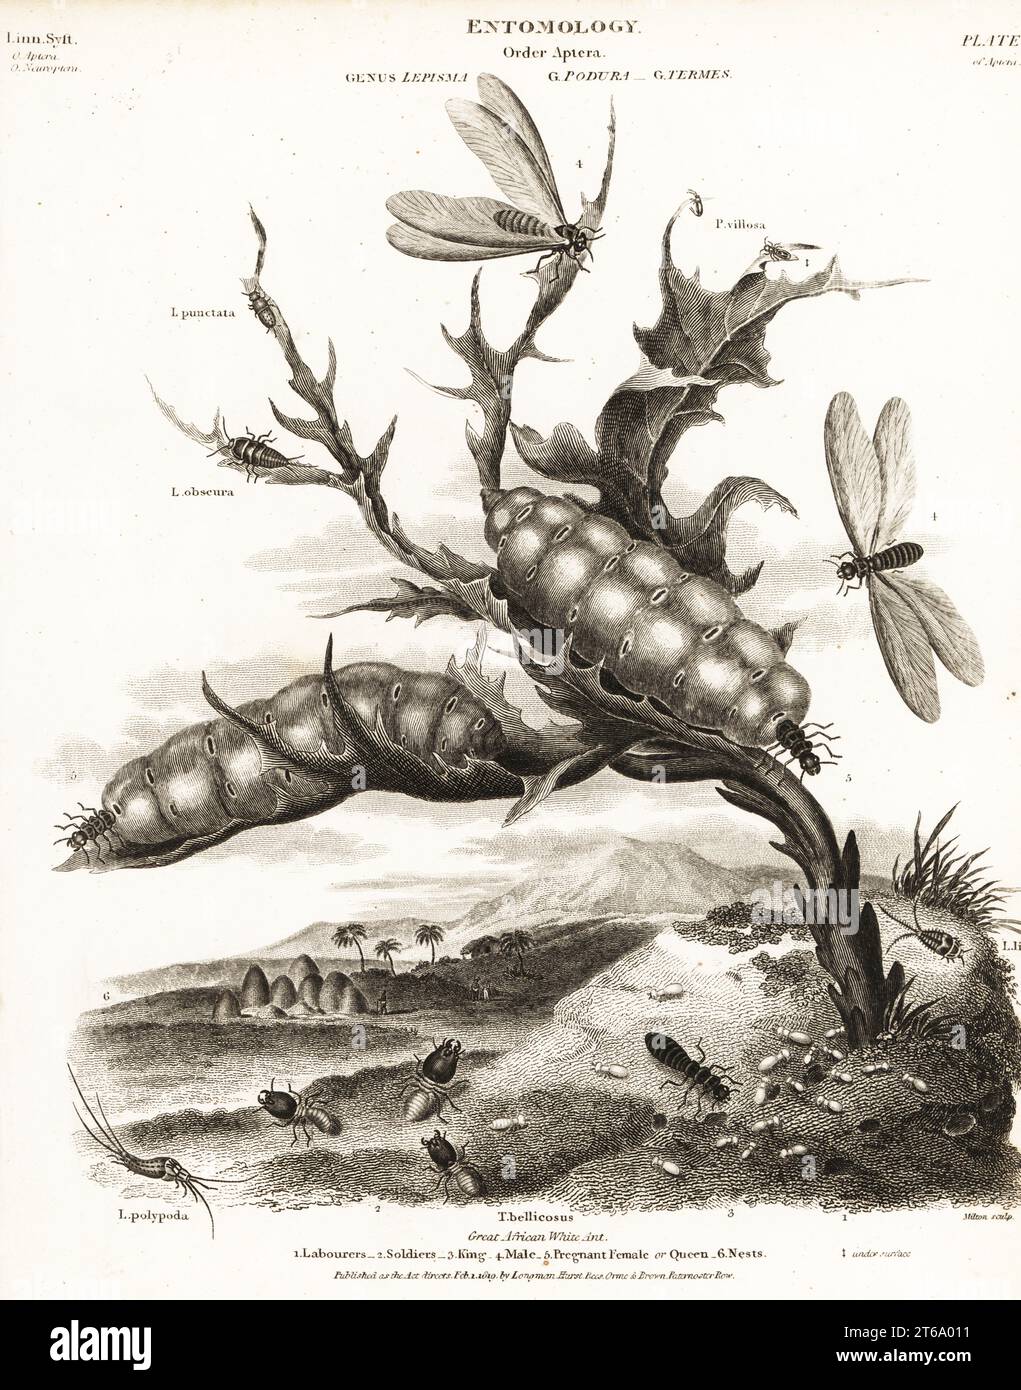 Great African white ant, Macrotermes bellicosus (Termes bellicosus). Labourers 1, soldiers 2, king 3, male 4, pregnant female or queen 5, nests 6. With silverfish, Lepisma punctata, Lepisma obscura, Lepisma polypoda, Podura villosa, etc. Copperplate engraving by Milton from Abraham Rees' Cyclopedia or Universal Dictionary of Arts, Sciences and Literature, Longman, Hurst, Rees, Orme and Brown, London, 1810. Stock Photo